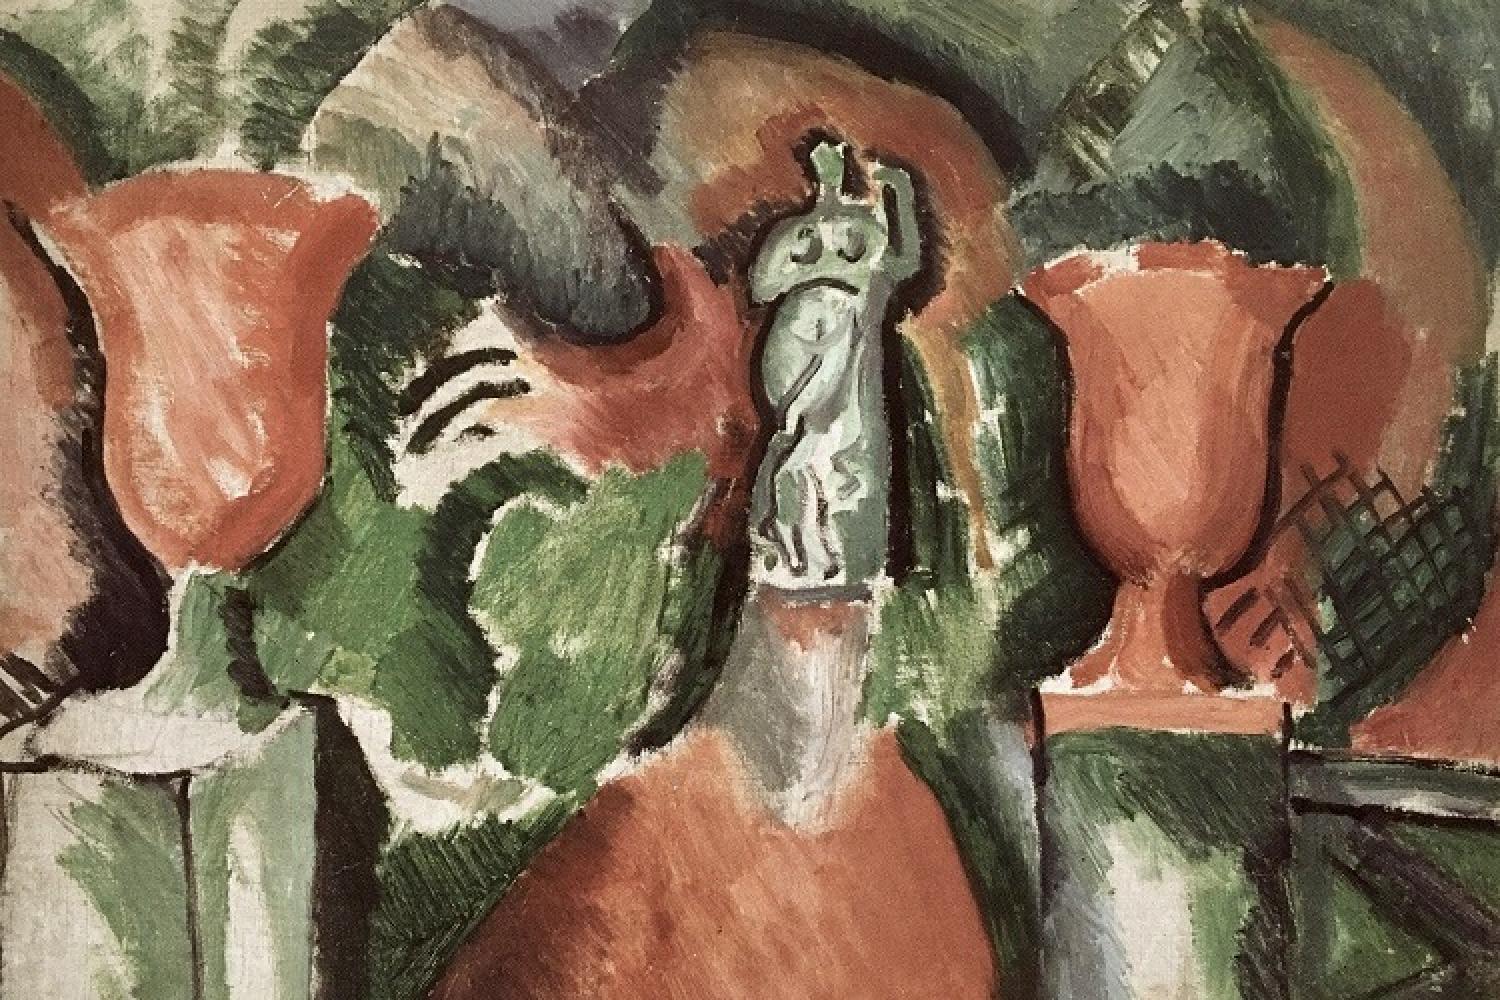 5_raoul_dufy_-_statue_aux_deux_vases_rouges_vers_1908_musee_cantini.jpg